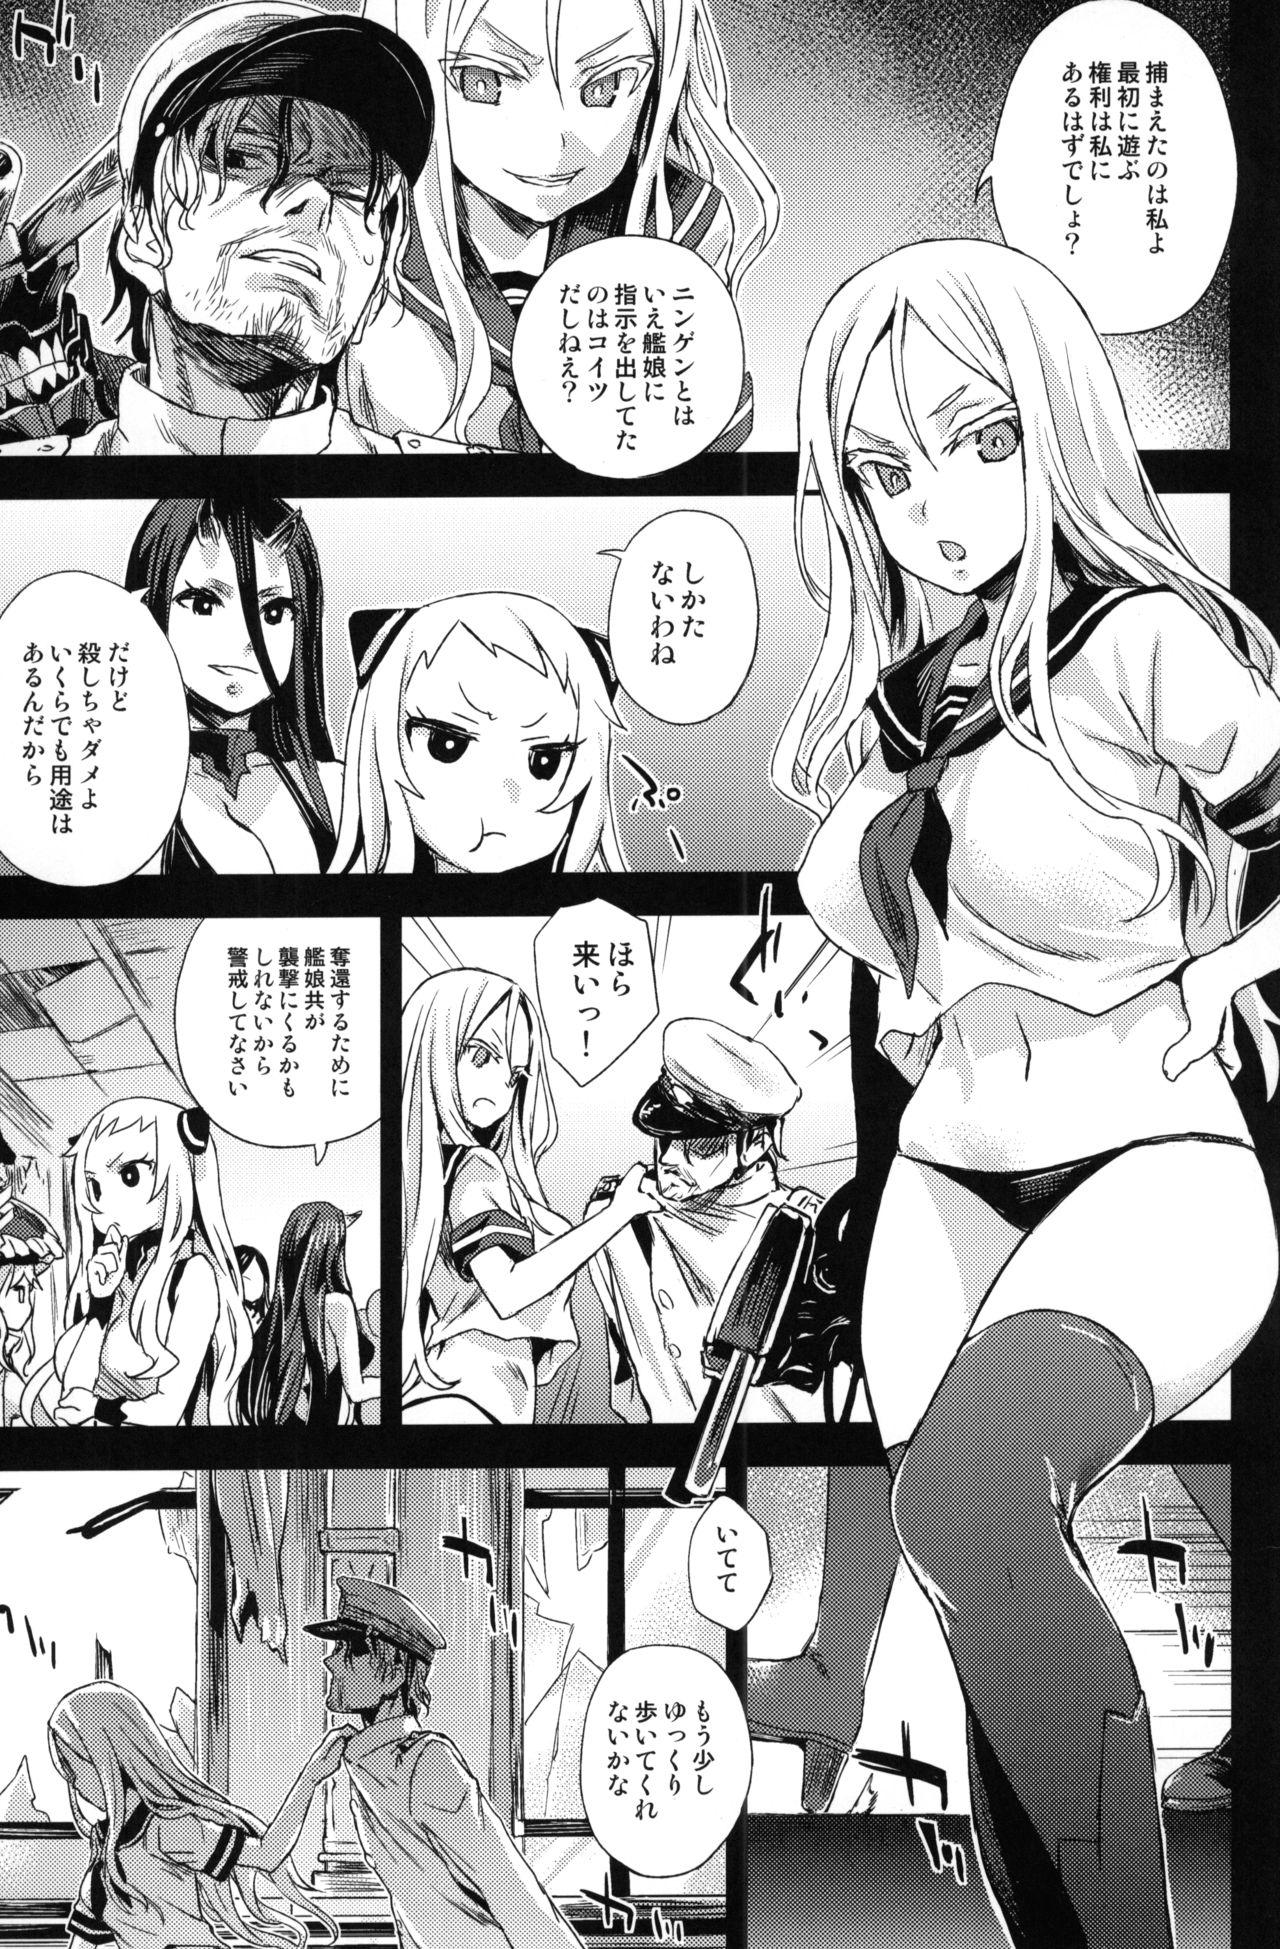 Highschool VictimGirls 17 SOS - Kantai collection Young Petite Porn - Page 4